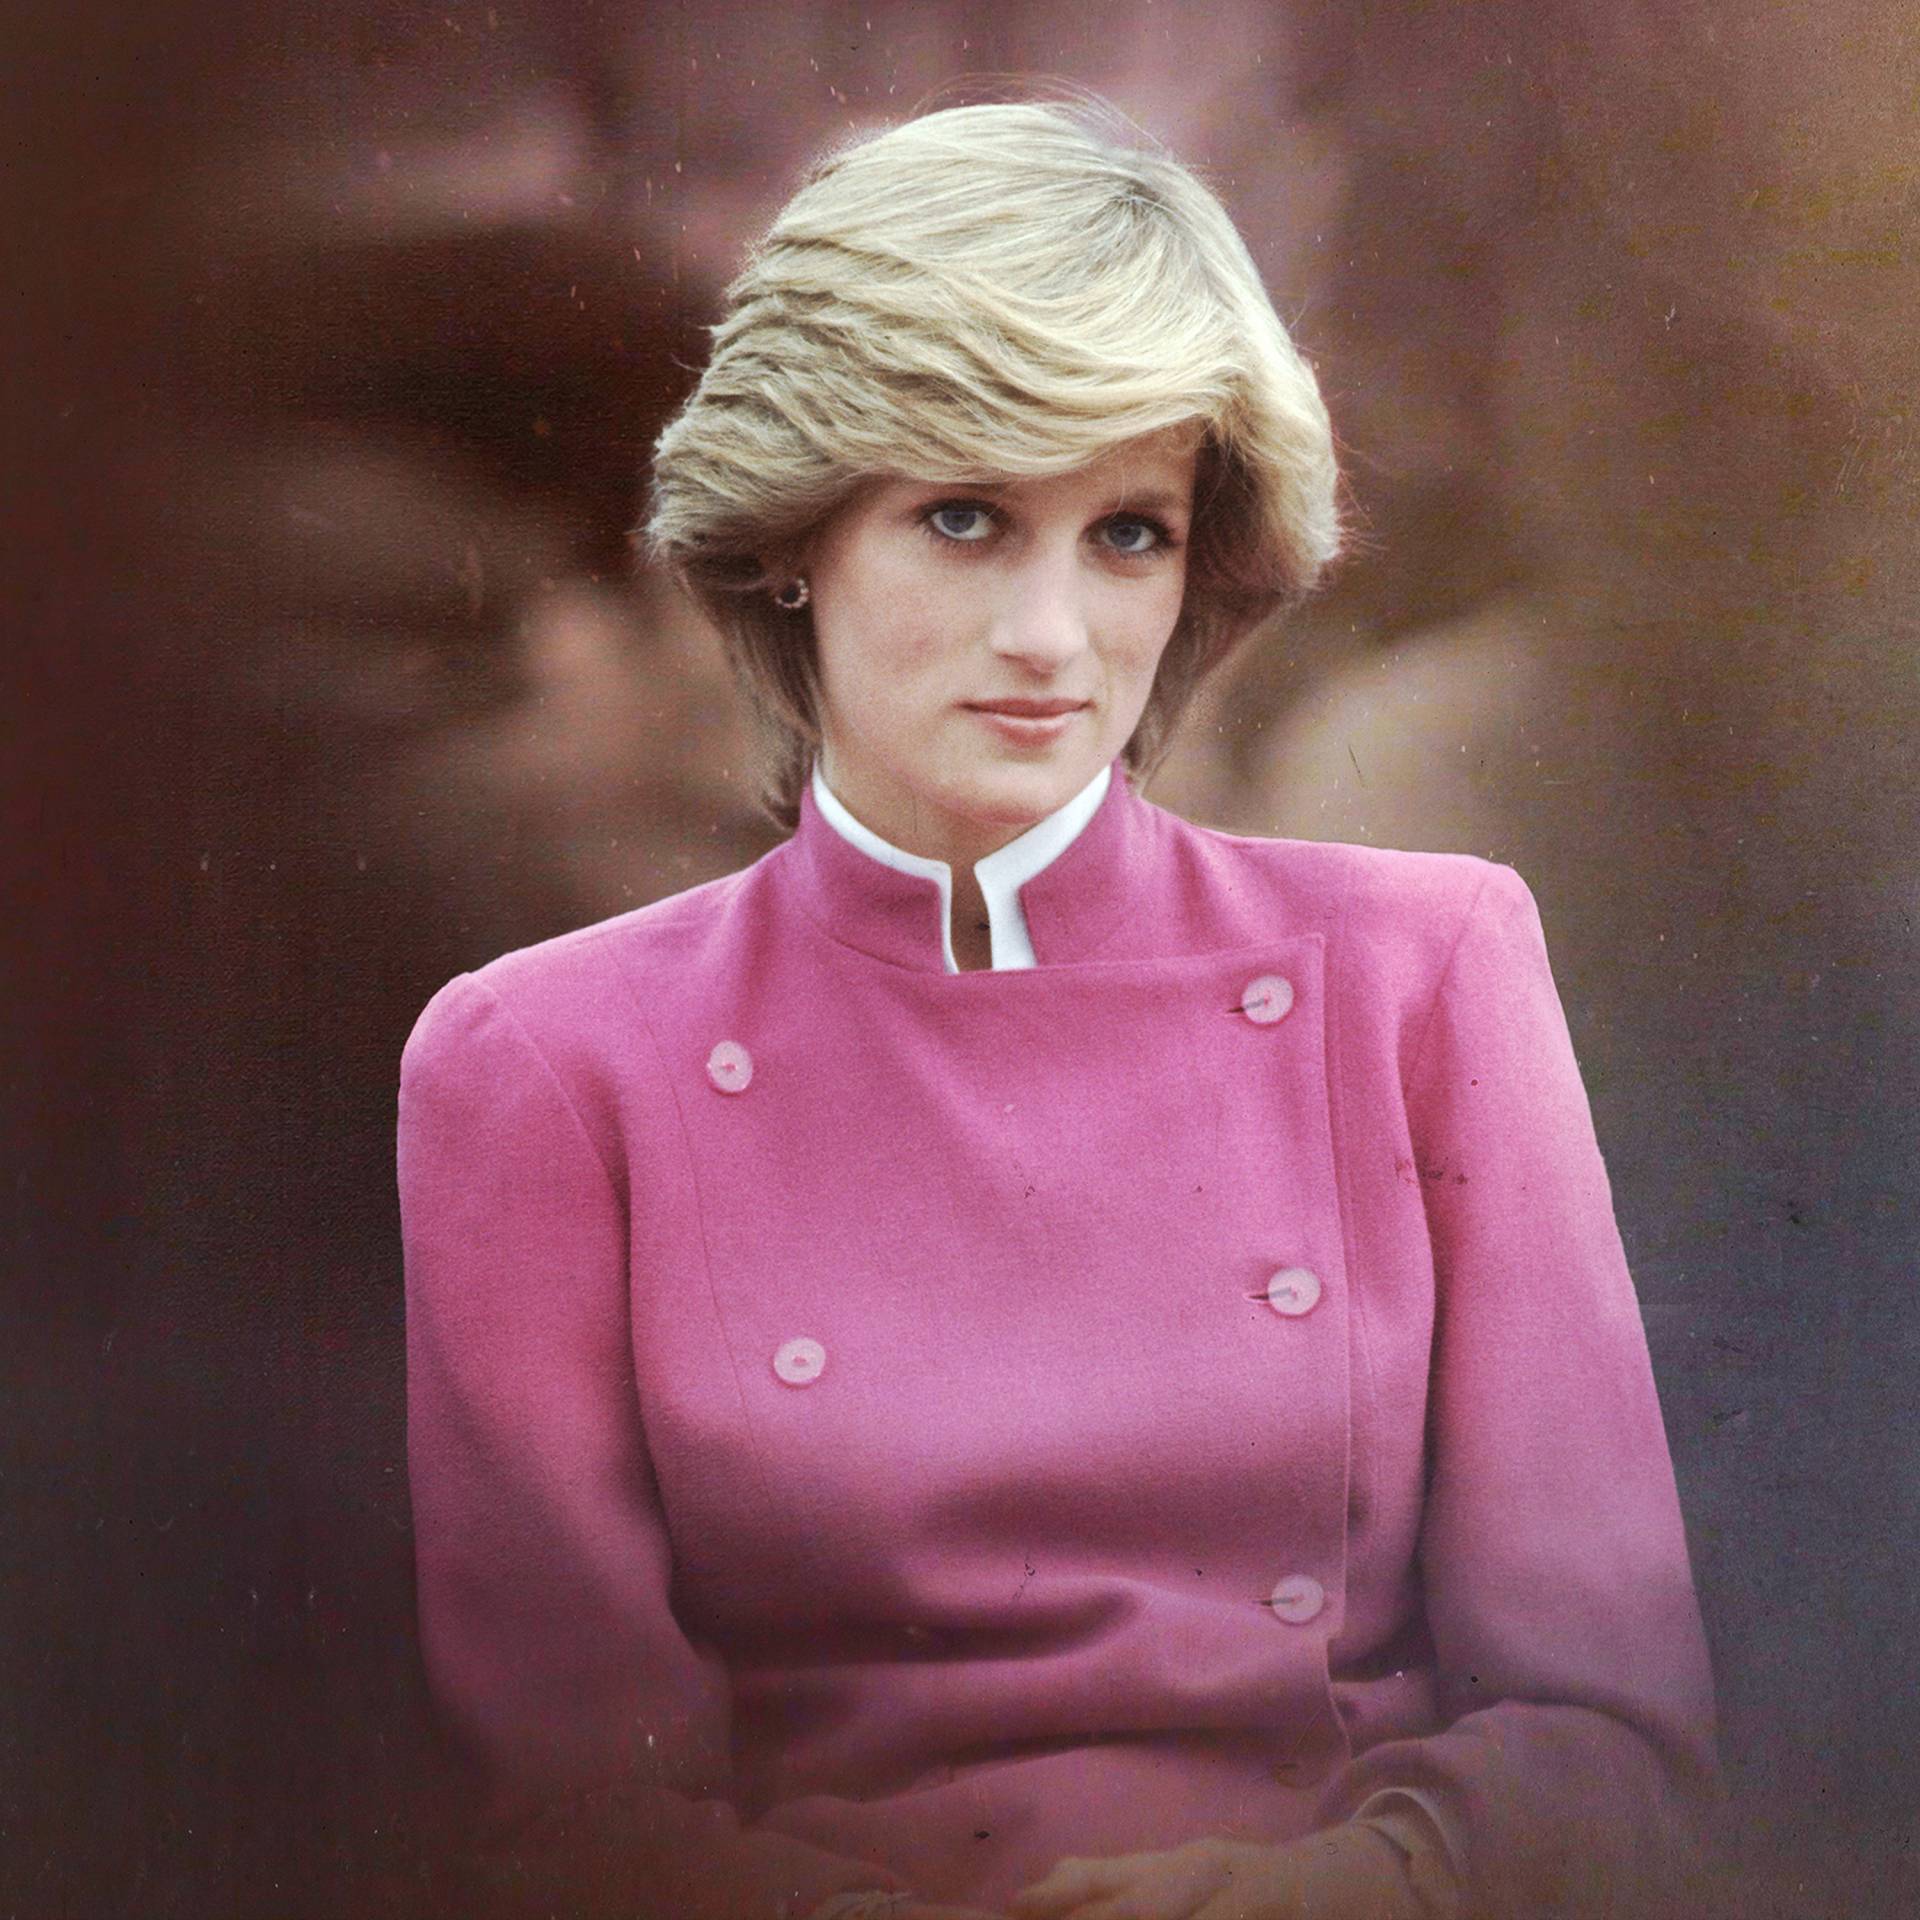 Why, at 59, I decided to dye my hair pink, by Princess Diana's